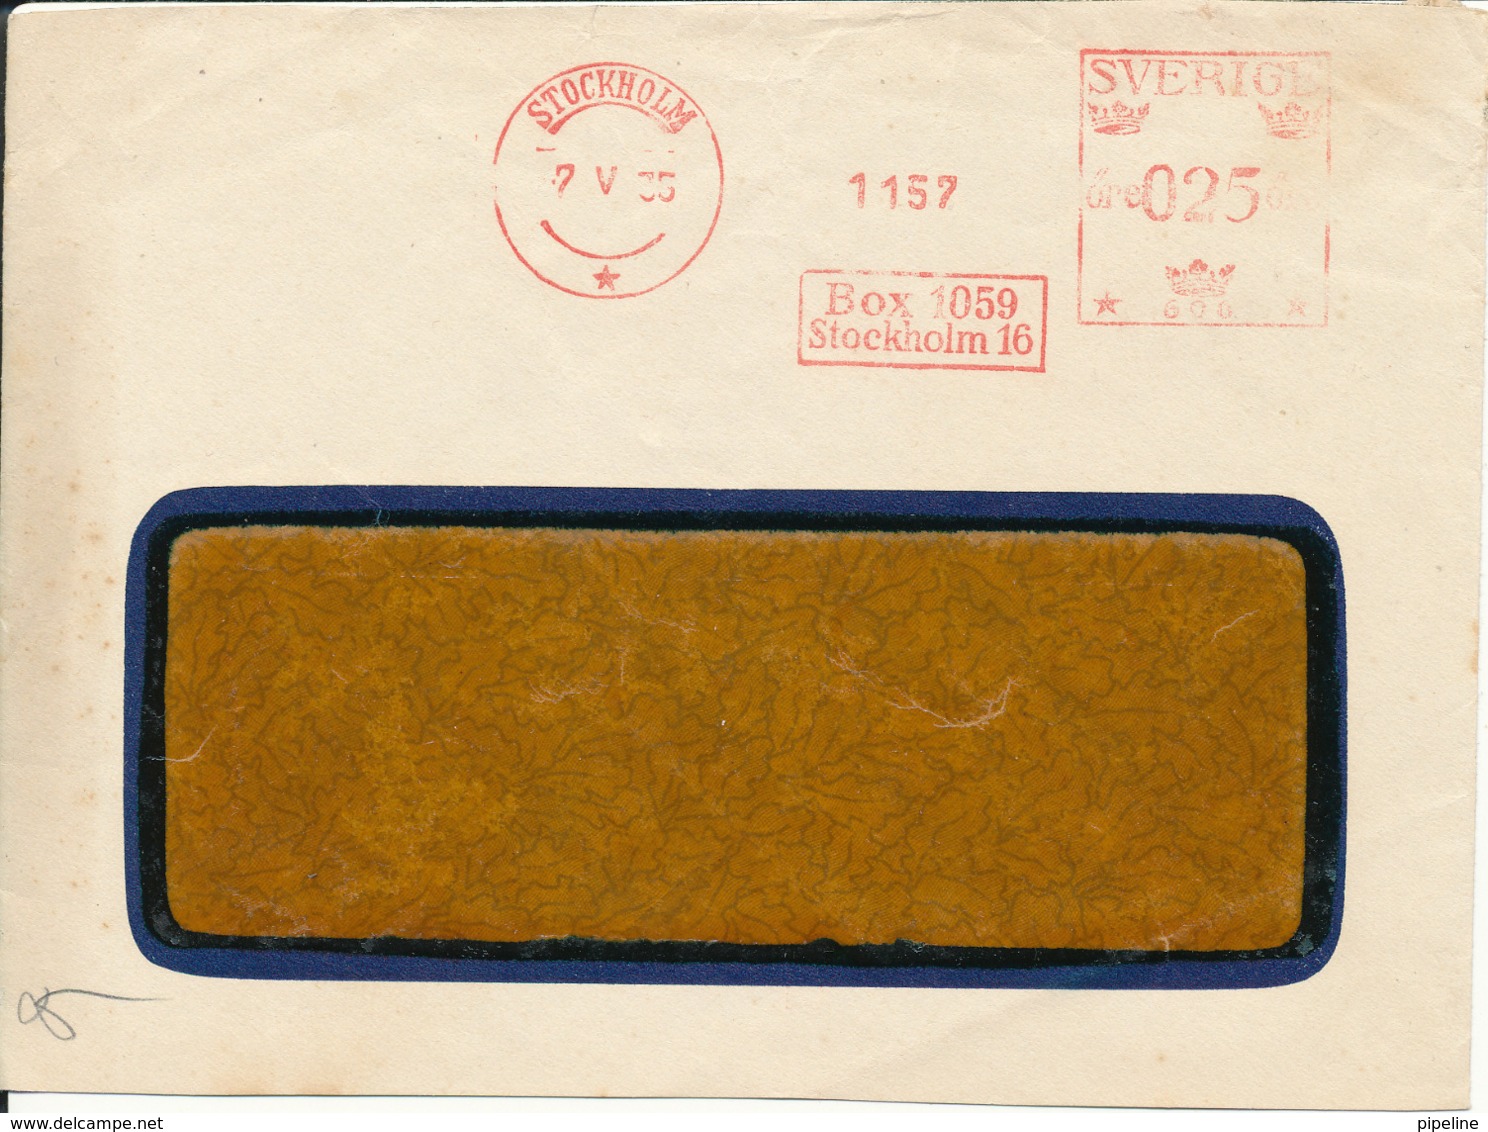 Sweden Cover With Meter Cancel Stockholm 7-5-1935 (Box 1059 Stockholm 16) - Covers & Documents